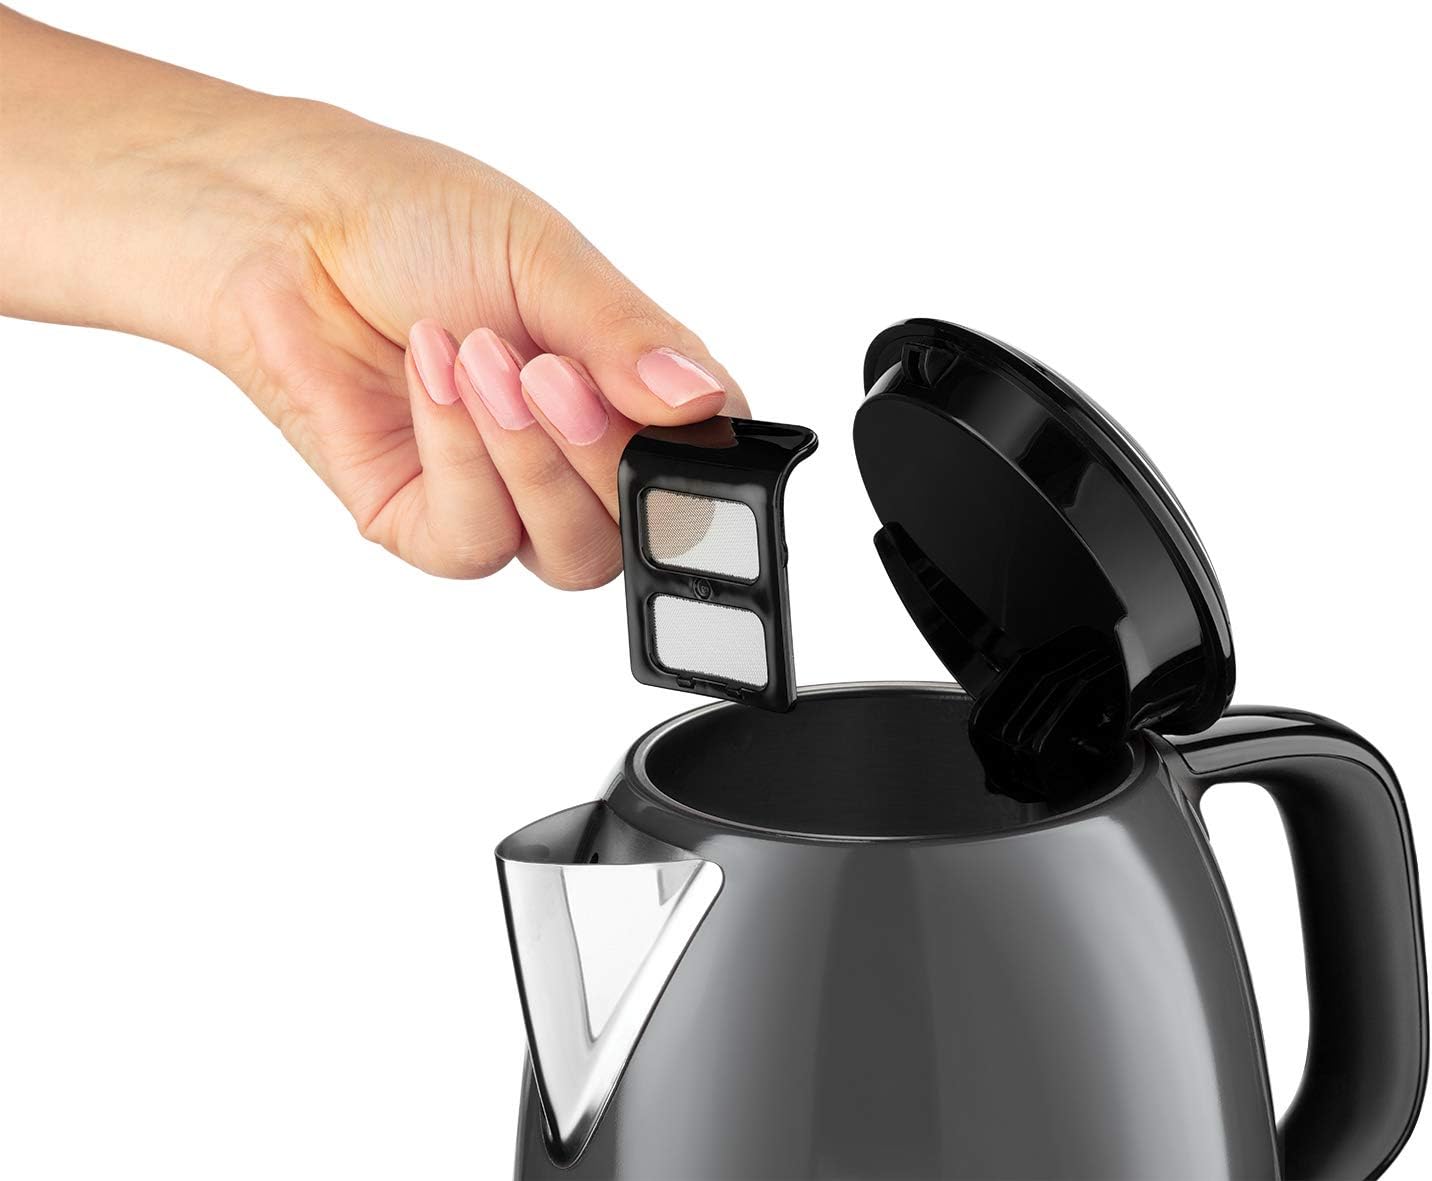 Russell Hobbs Colours+ 24993-70 Small Kettle [1.0 L] Stainless Steel Grey (2400 W, Quick Boil Function, Removable Limescale Filter, External Water Level Indicator, Travel Kettle) Tea Maker